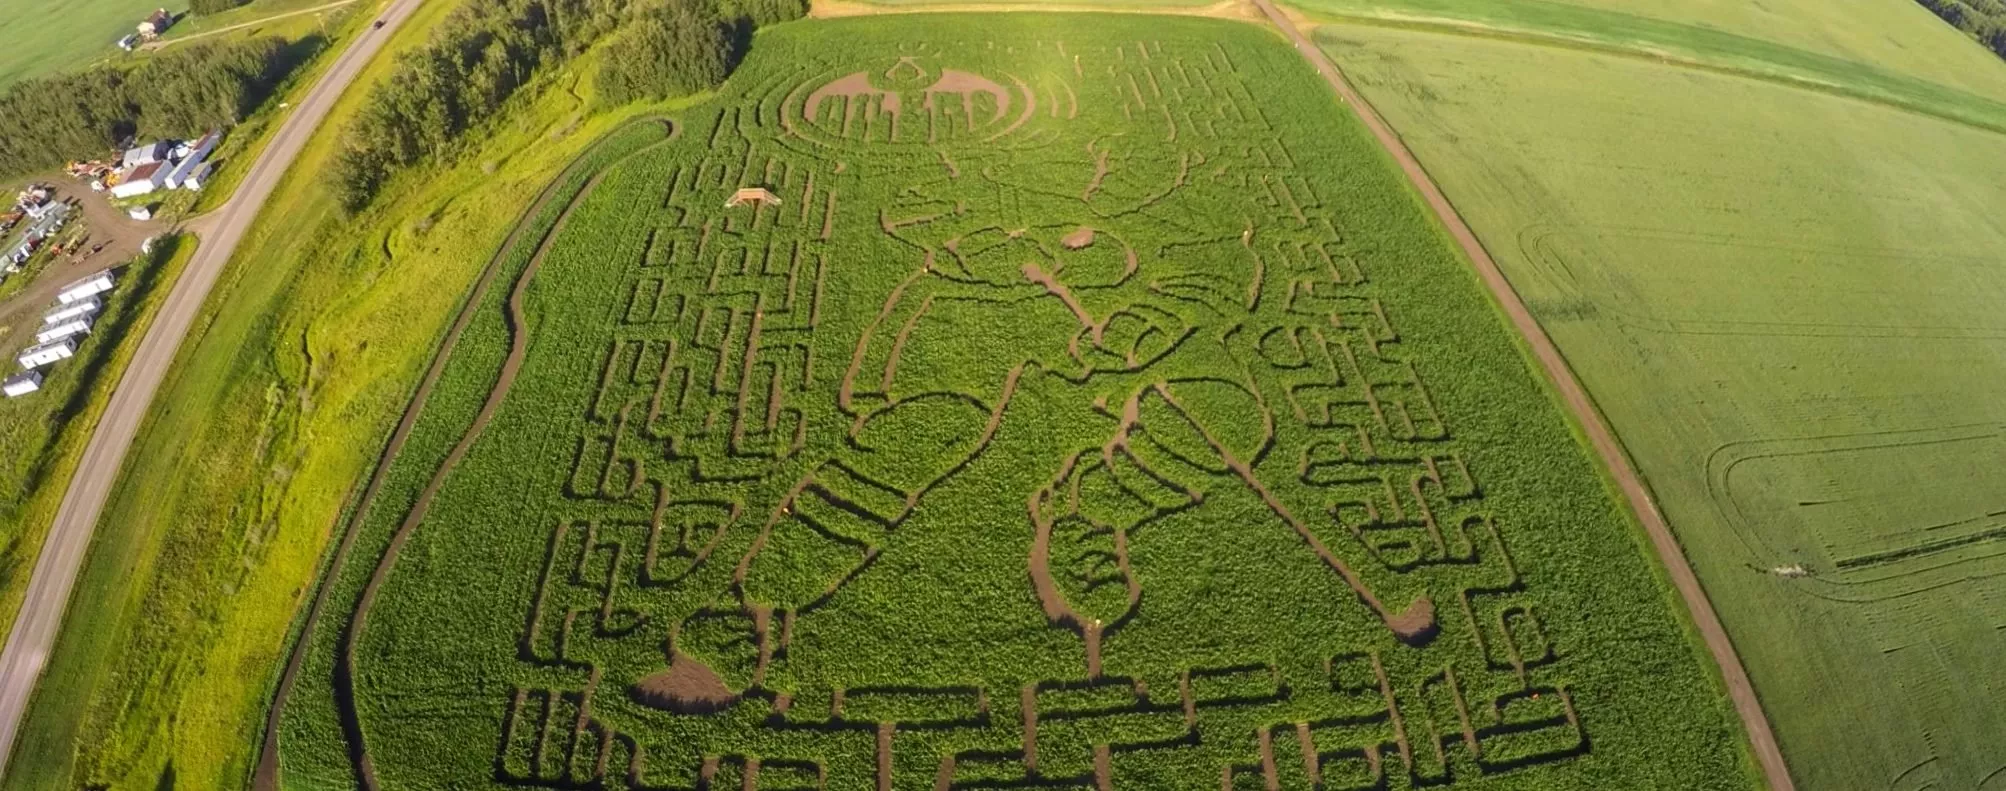 Edmonton Corn Maze in Canada, North America | Nature Reserves - Rated 3.7